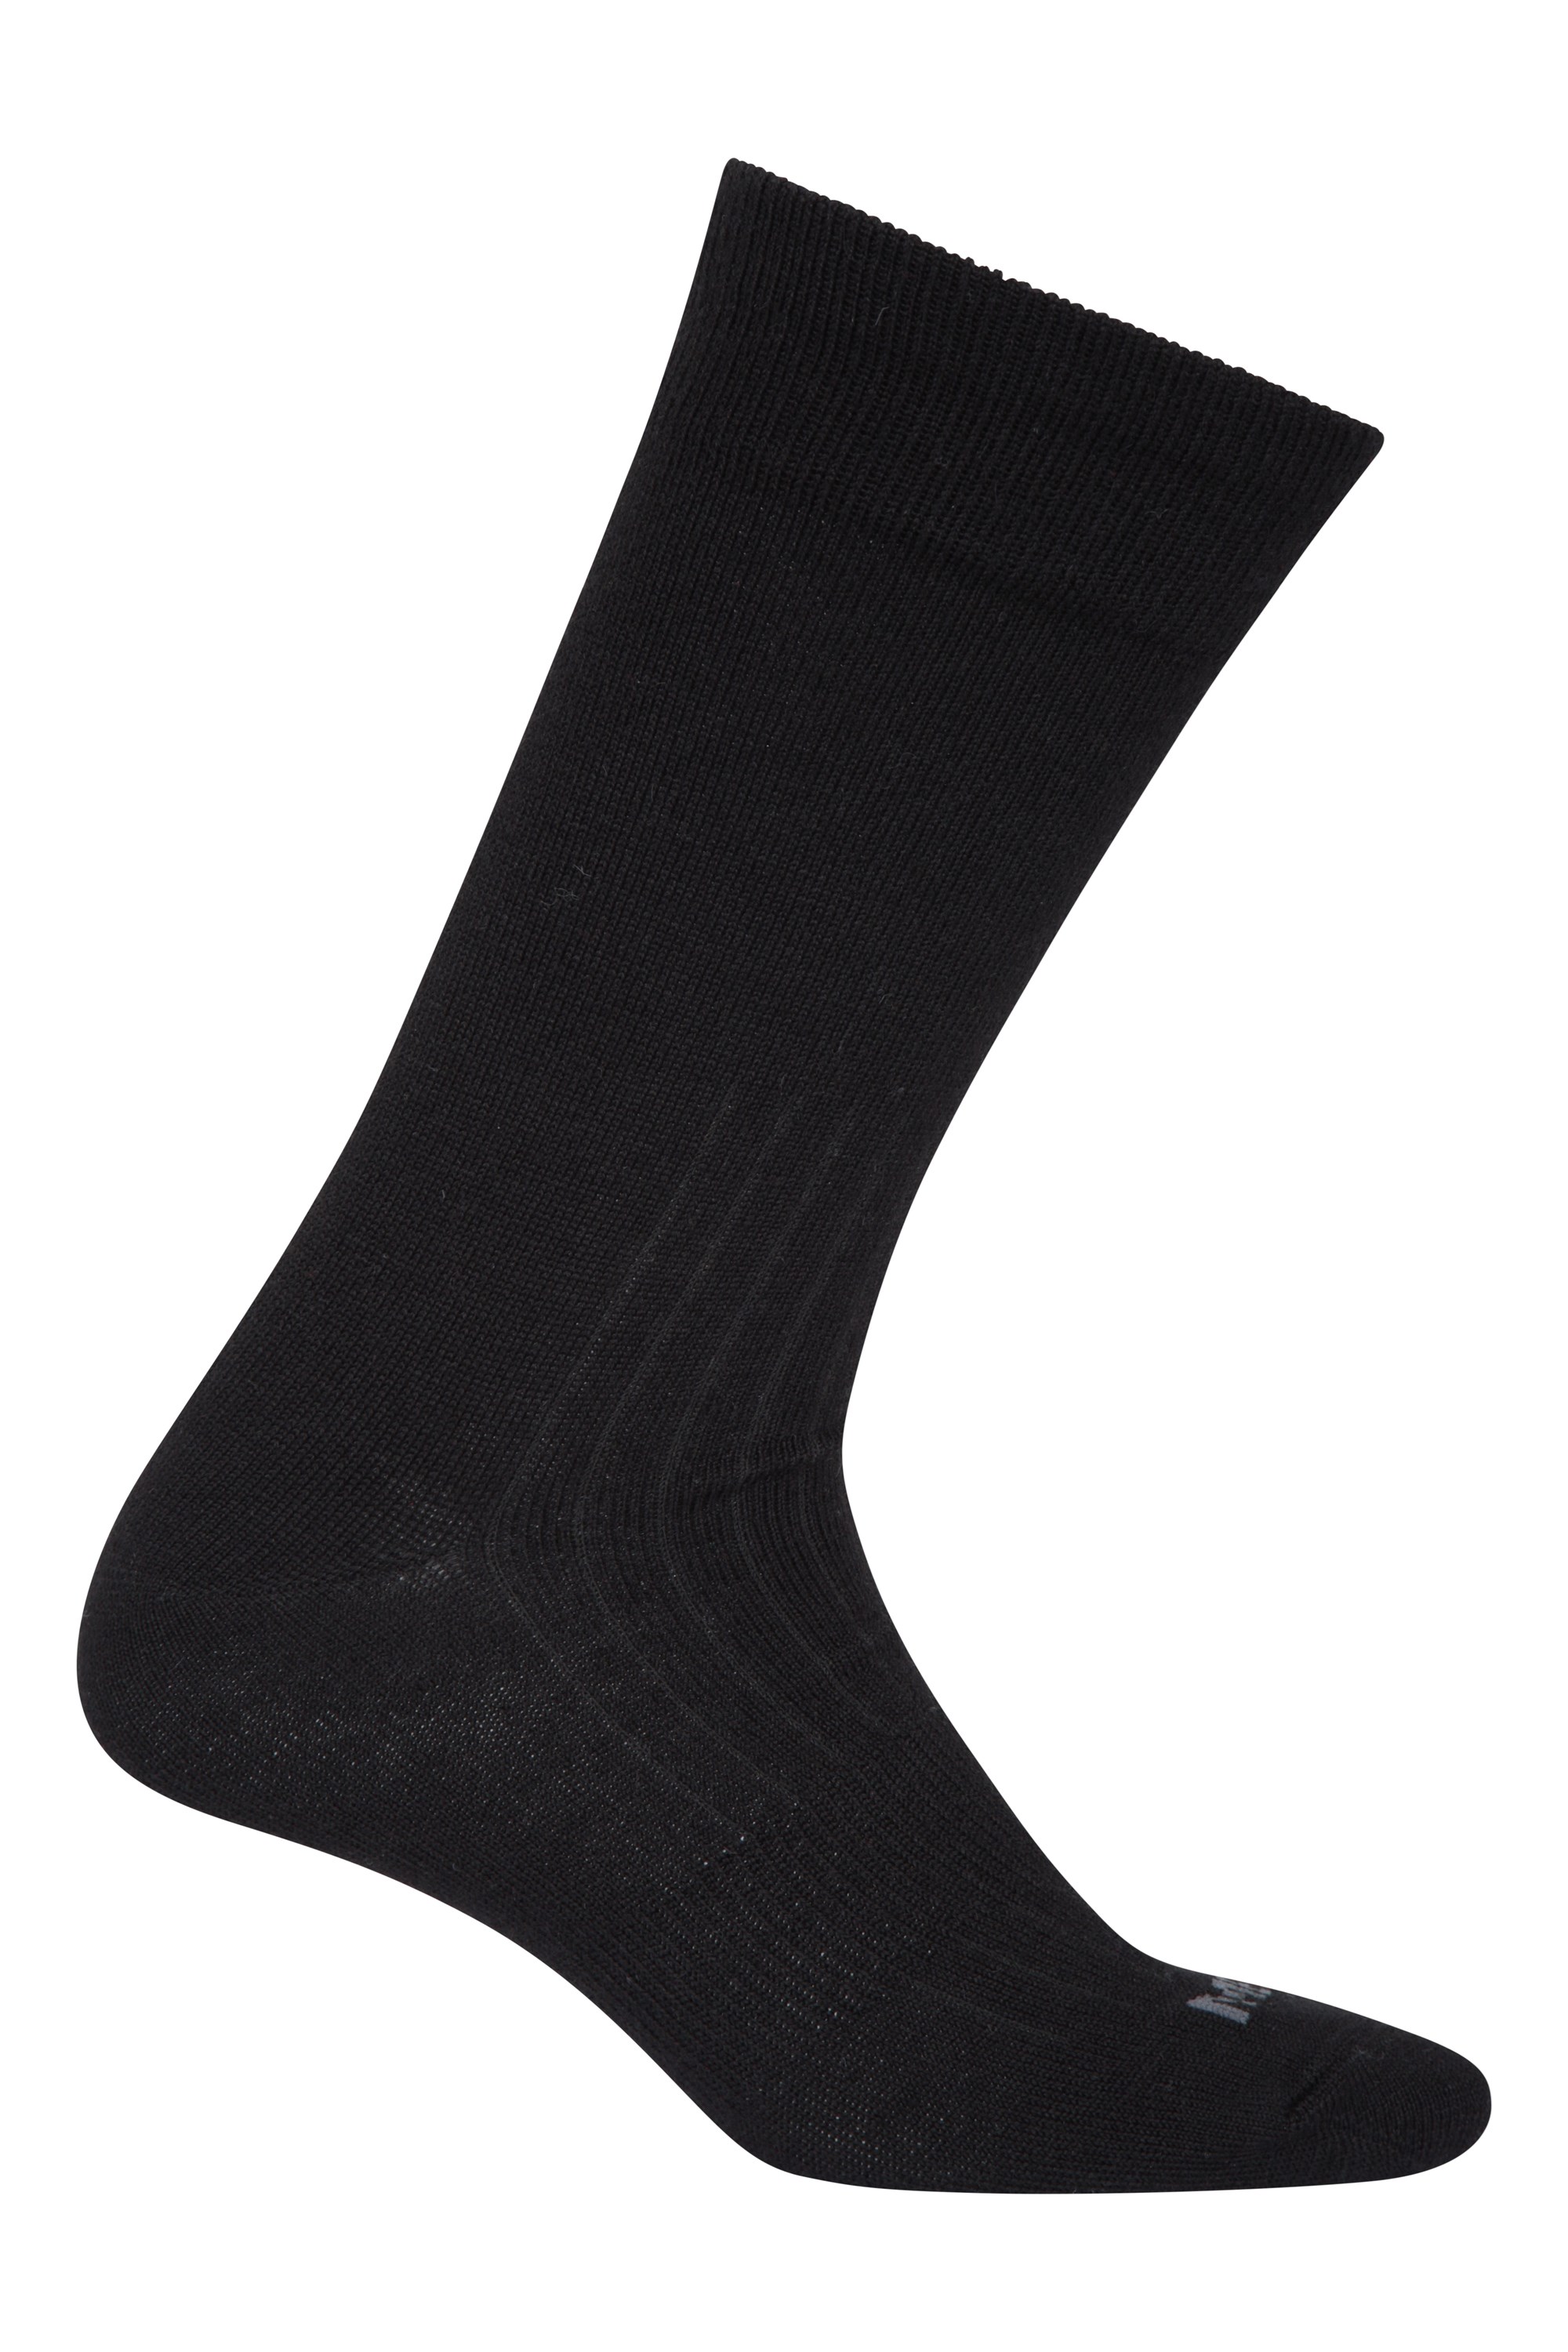 Mountain Warehouse Outdoor Socks Comfortable Polyester and Spandex 